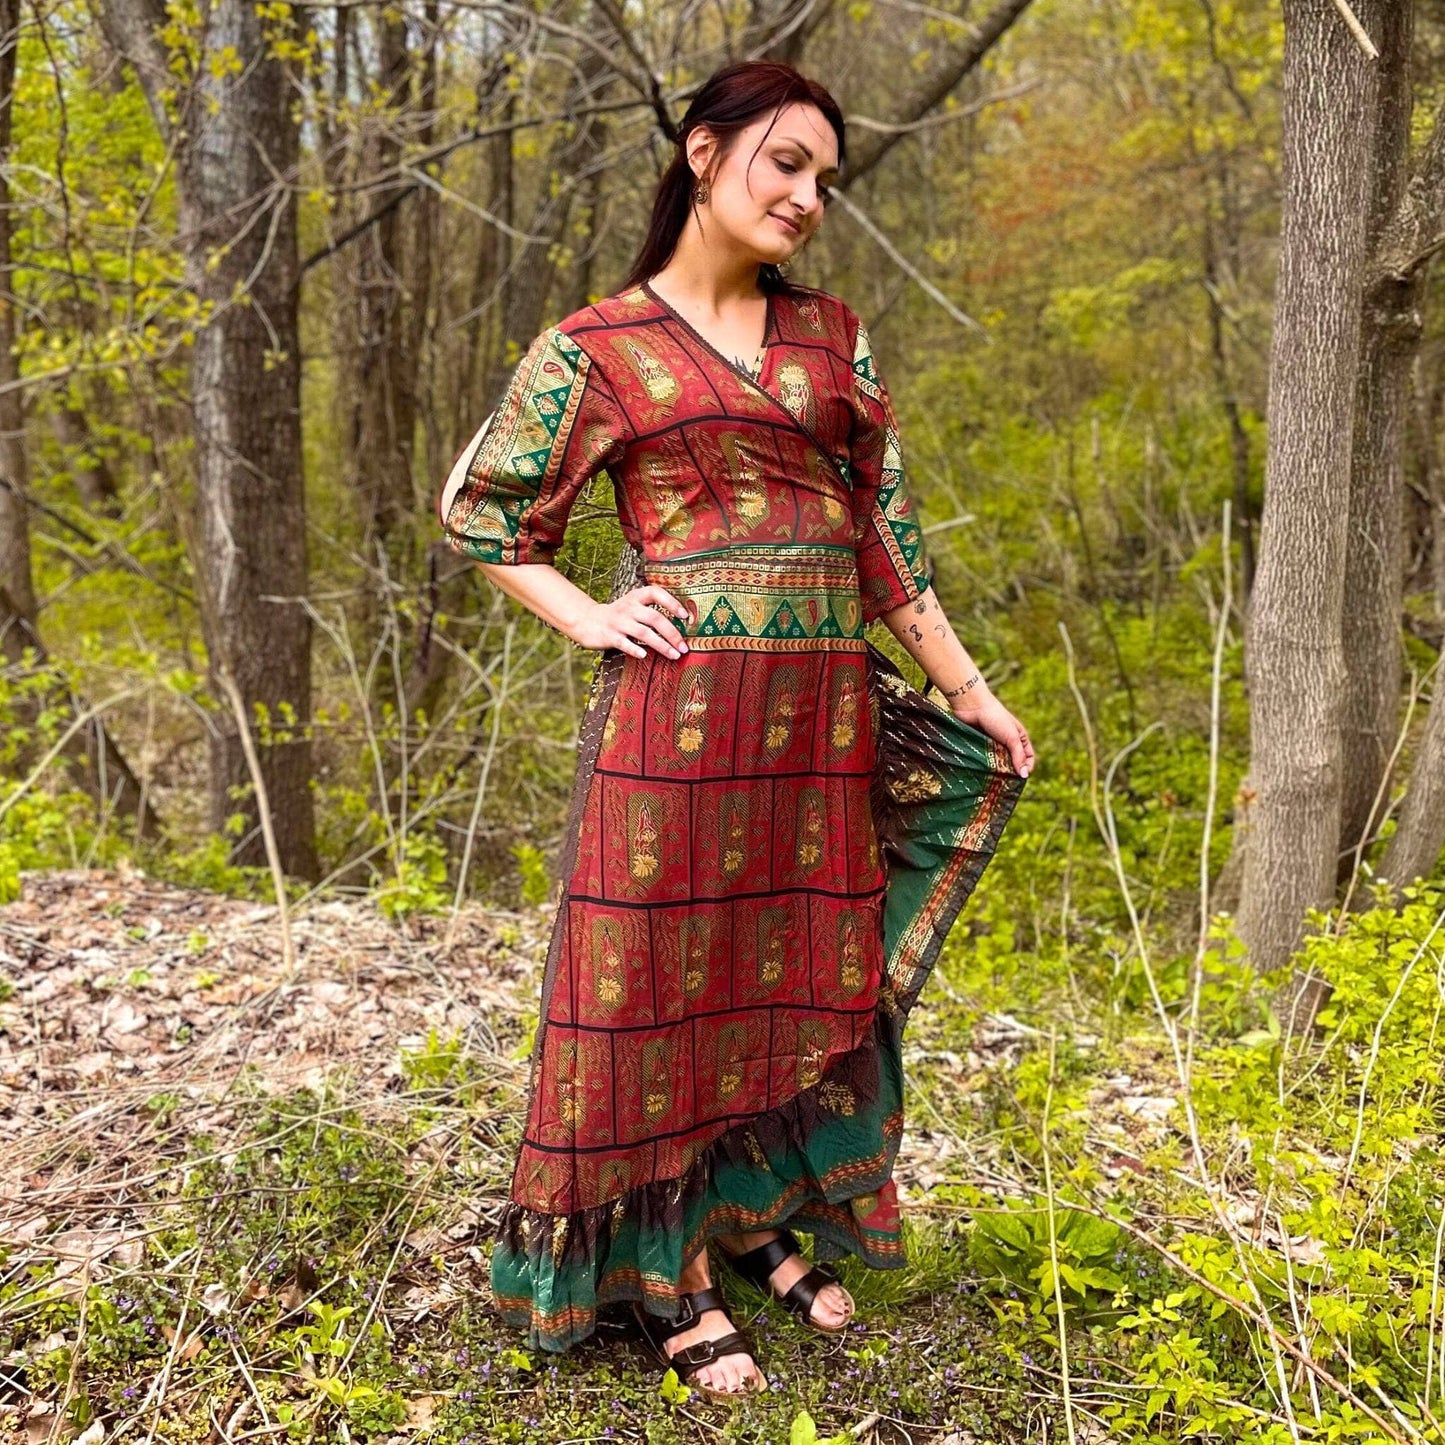 A model standing in a forest wearing a maroon sari silk wrap dress and a gladiator sandal. The dress has emerald edges and shimmering gold accents across.